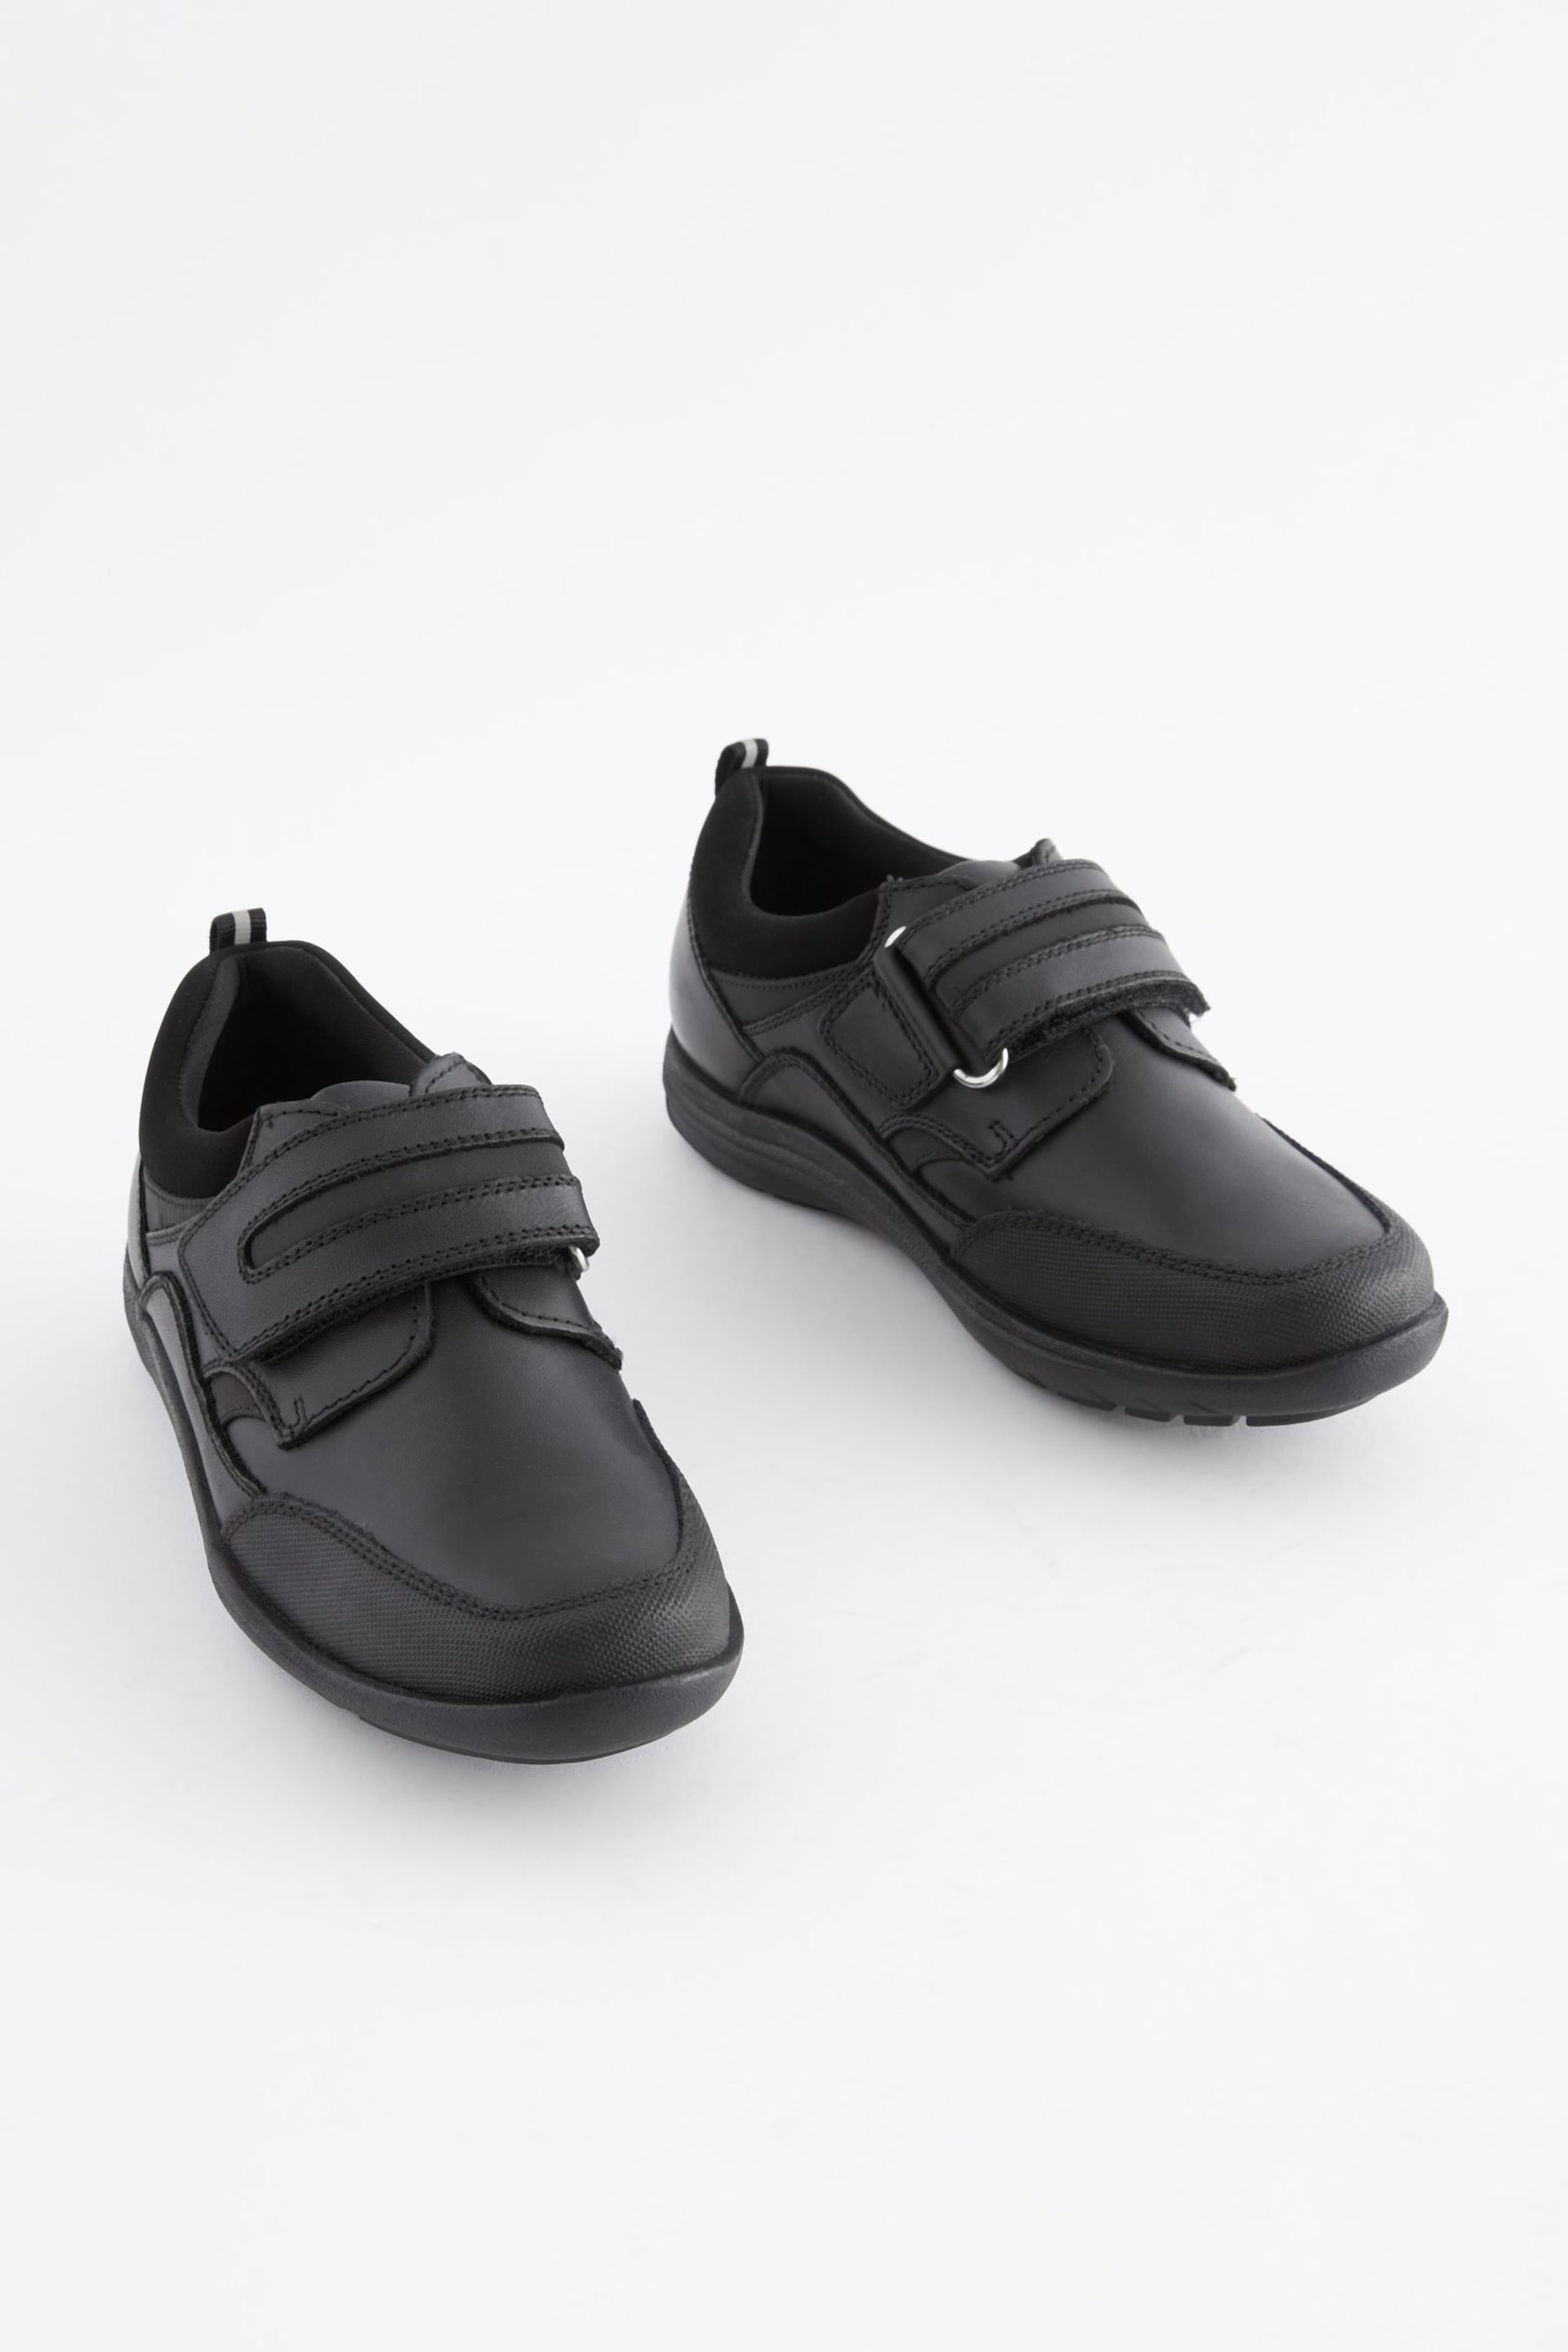 Black Standard Fit (F) School Leather Single Strap Shoes - Image 1 of 7